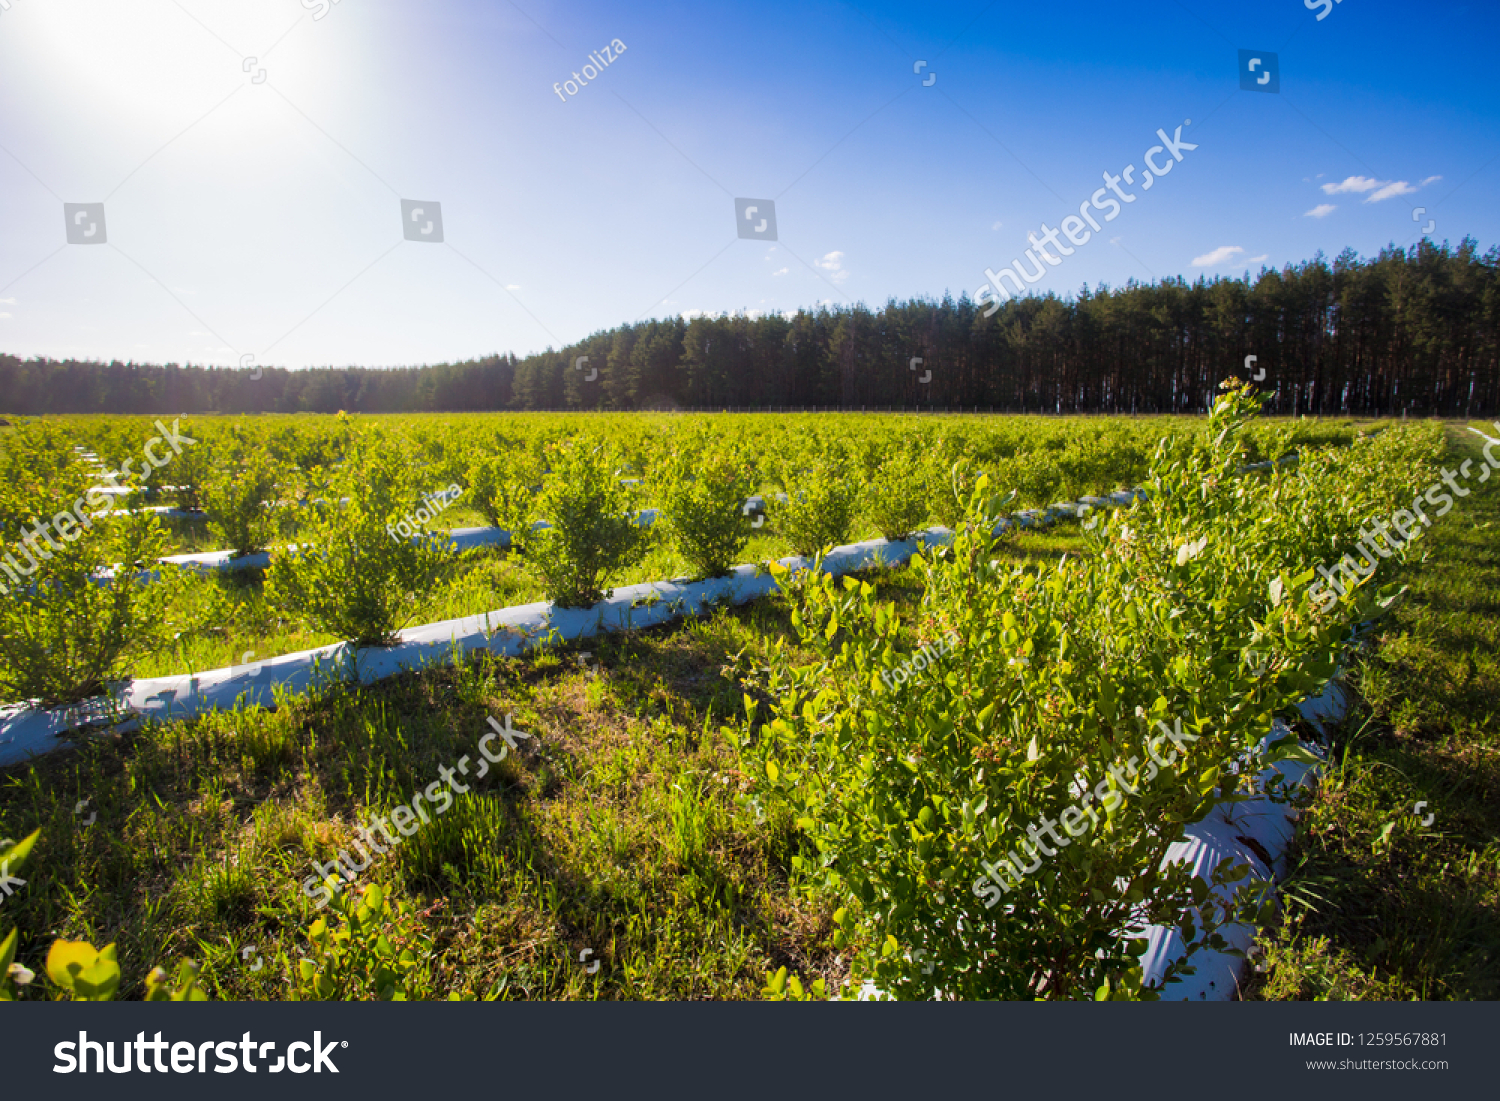 Field of blueberries, bushes with future berries against the blue sky. Farm with berries. Ukraine. #1259567881